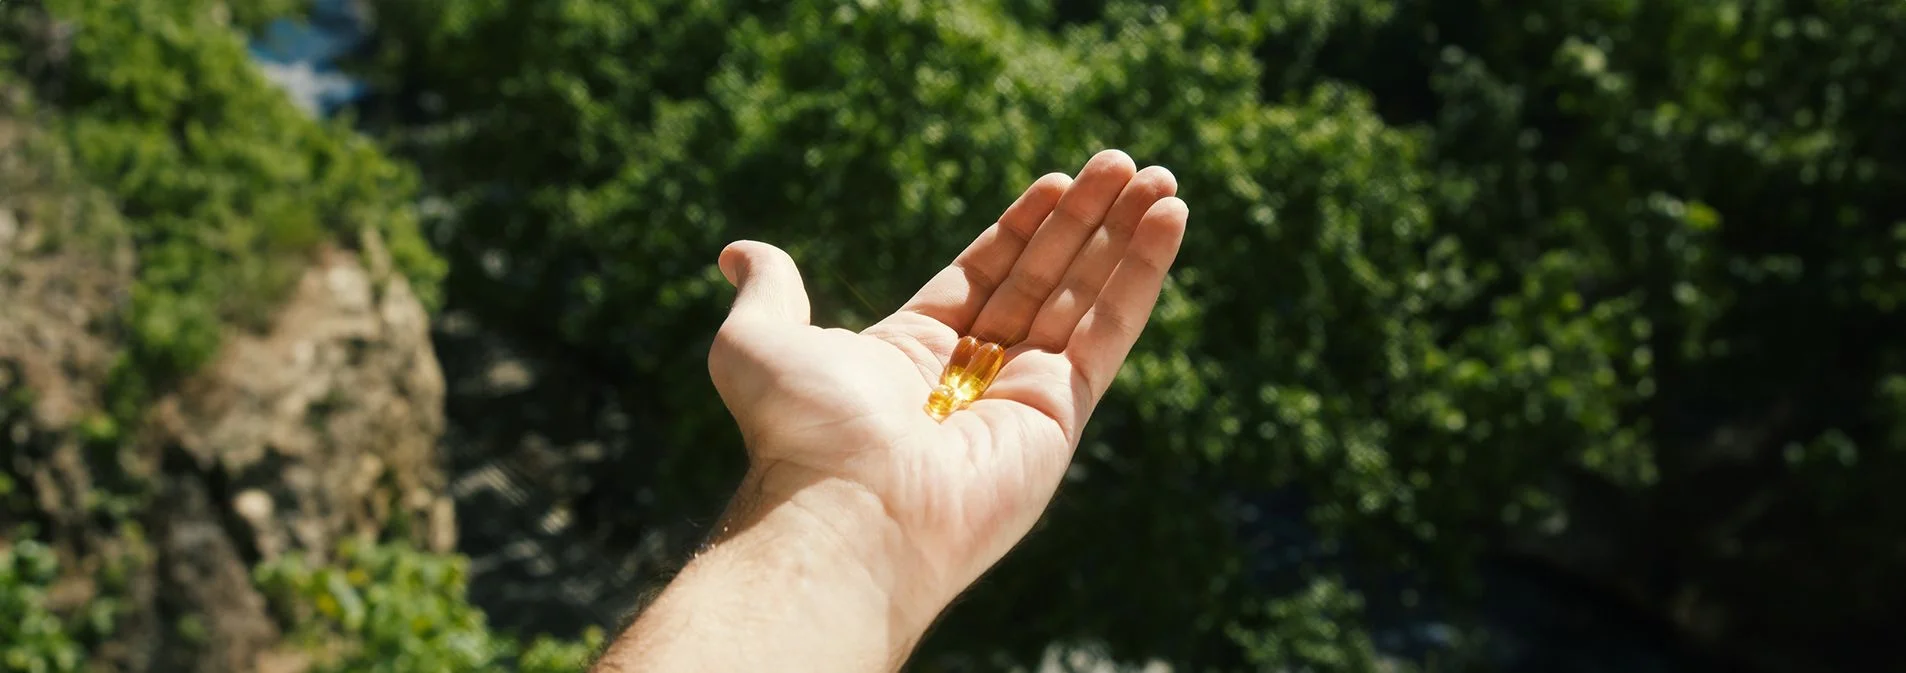 A hand holding two softgel capsules outside with a forest background